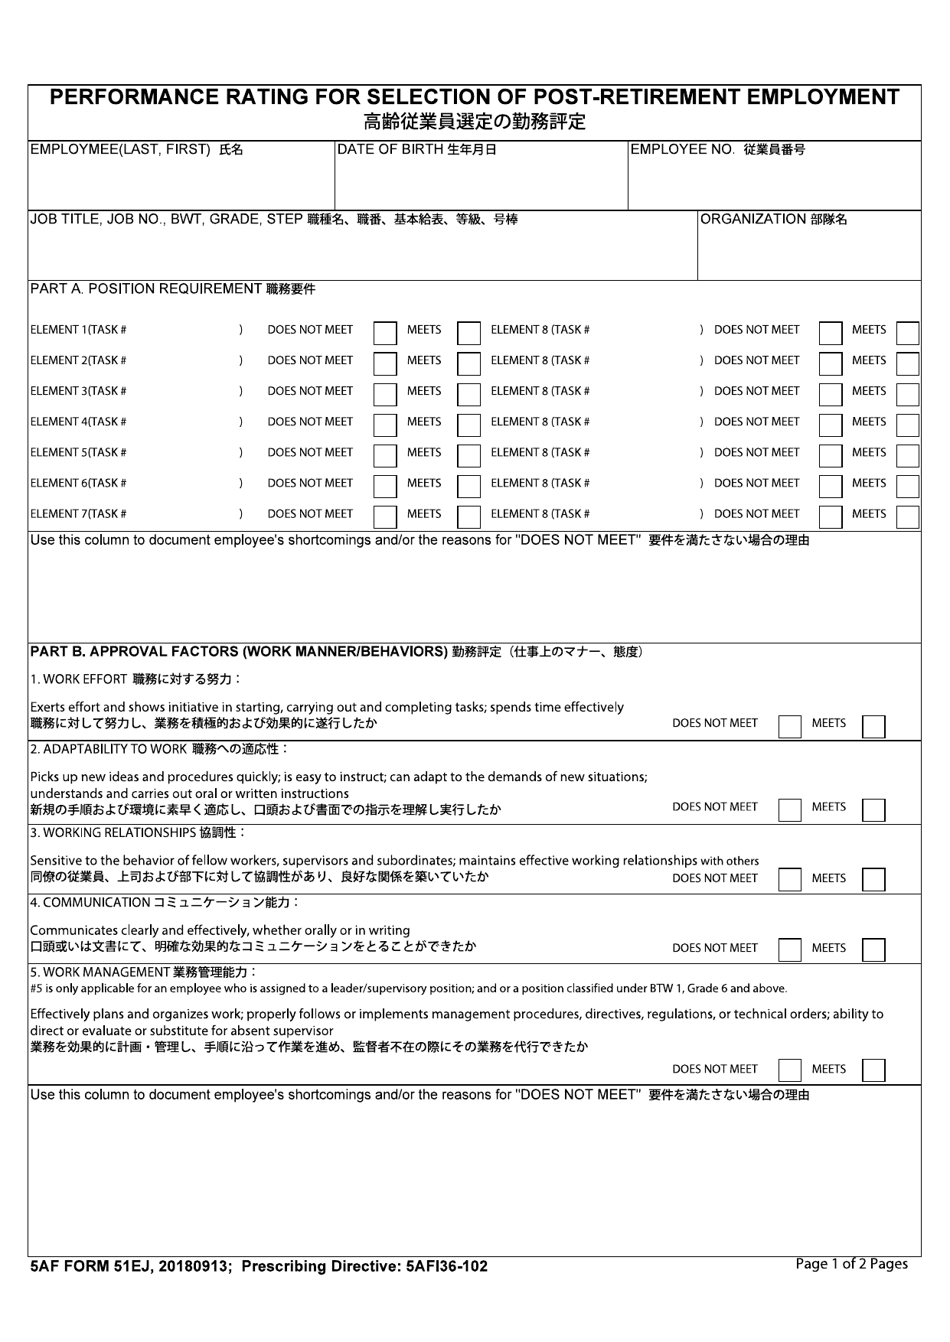 5 AF Form 51EJ Performance Rating for Selection of Post-retirement (English / Japanese), Page 1